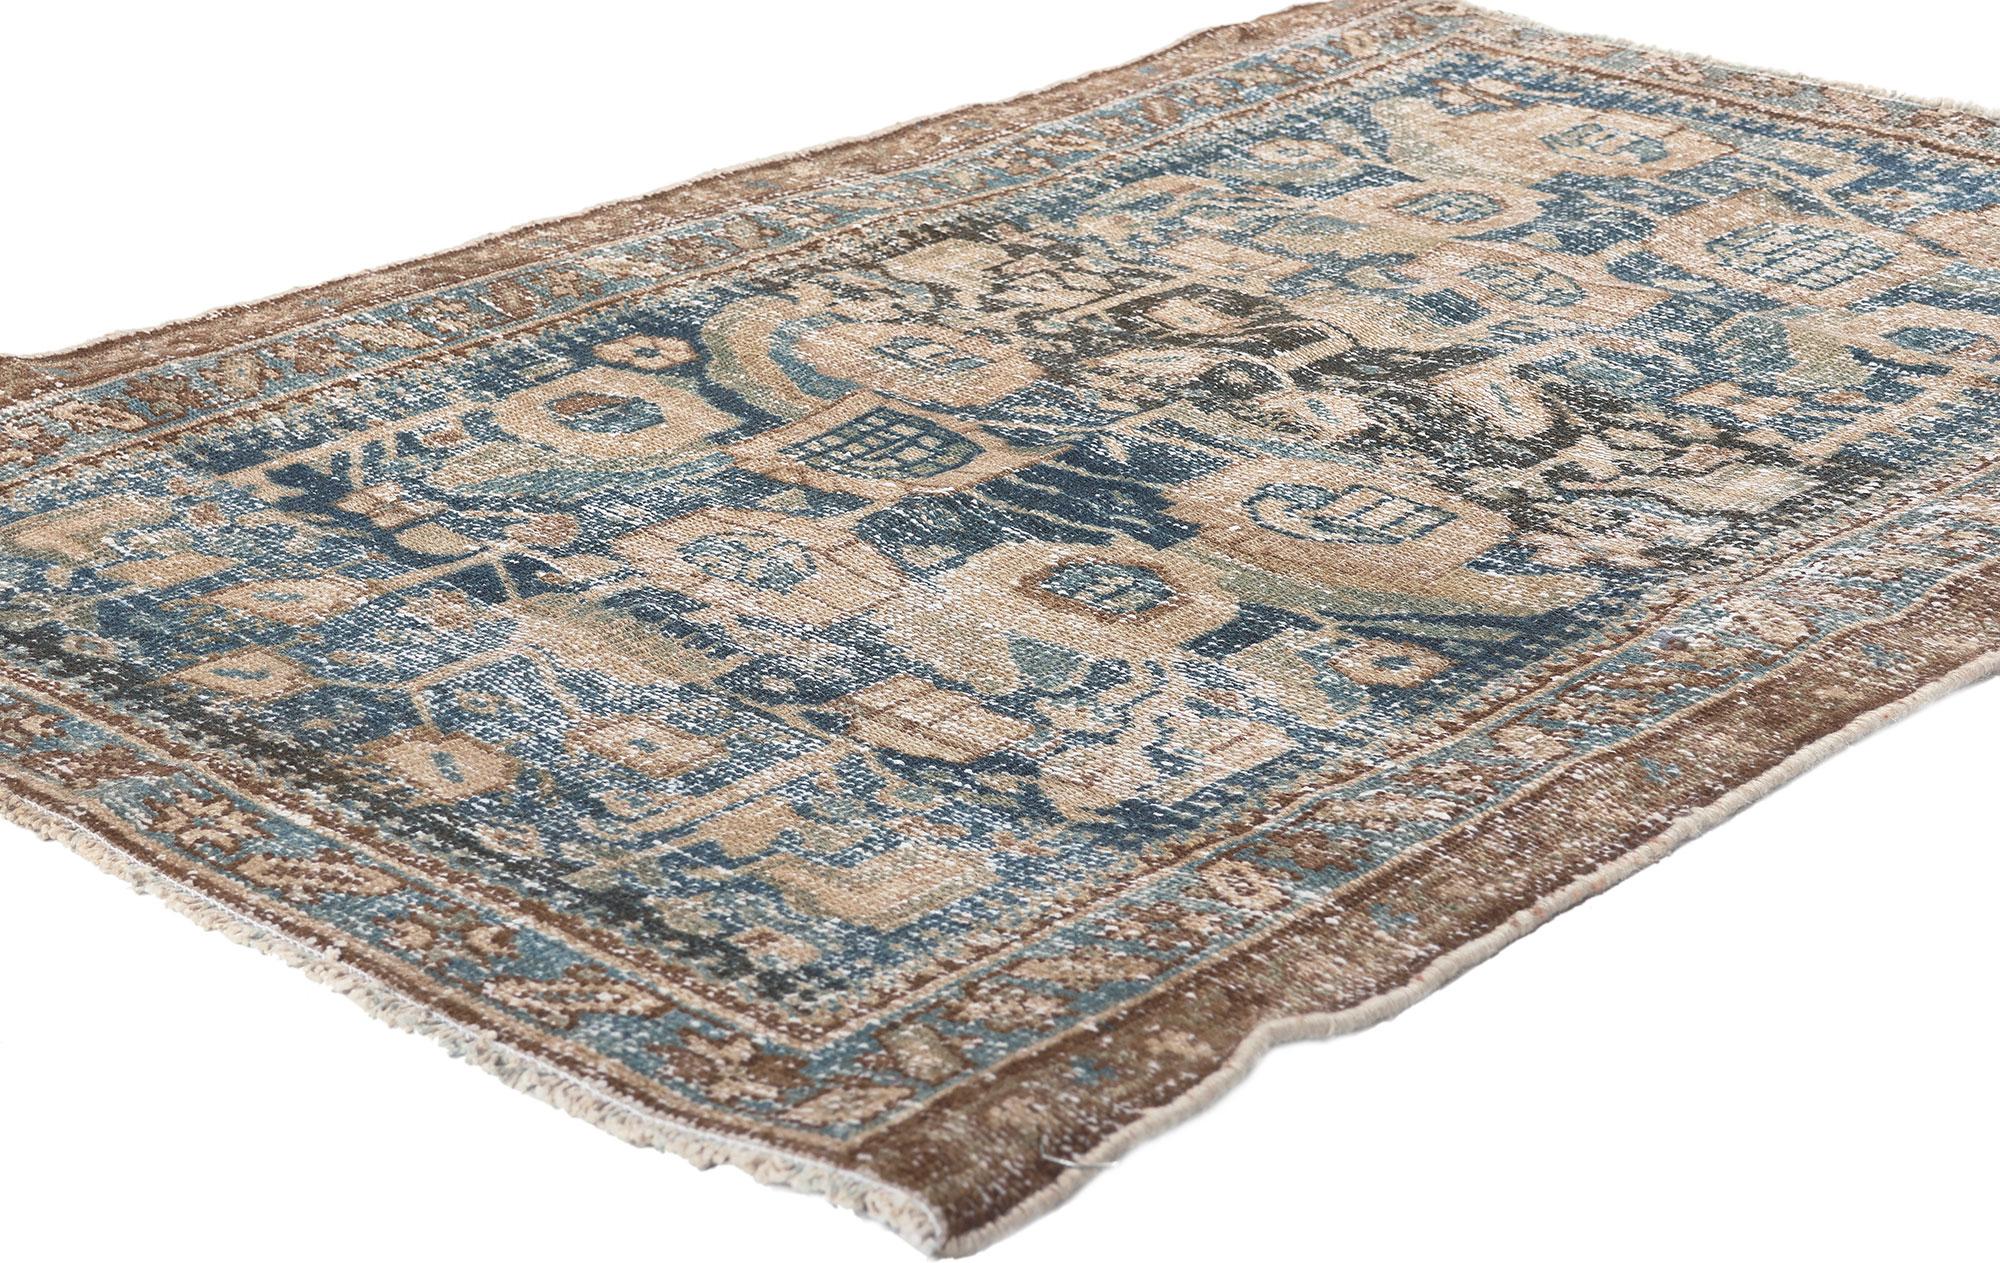 61276 Antique-Worn Persian Hamadan Rug, 02'07 x 03'09.
​Weathered finesse meets natural elegance in this hand knotted wool distressed antique-worn Persian Hamadan rug.

Rendered in variegated shades of Aegean blue, tan, brown, cerulean, sand,